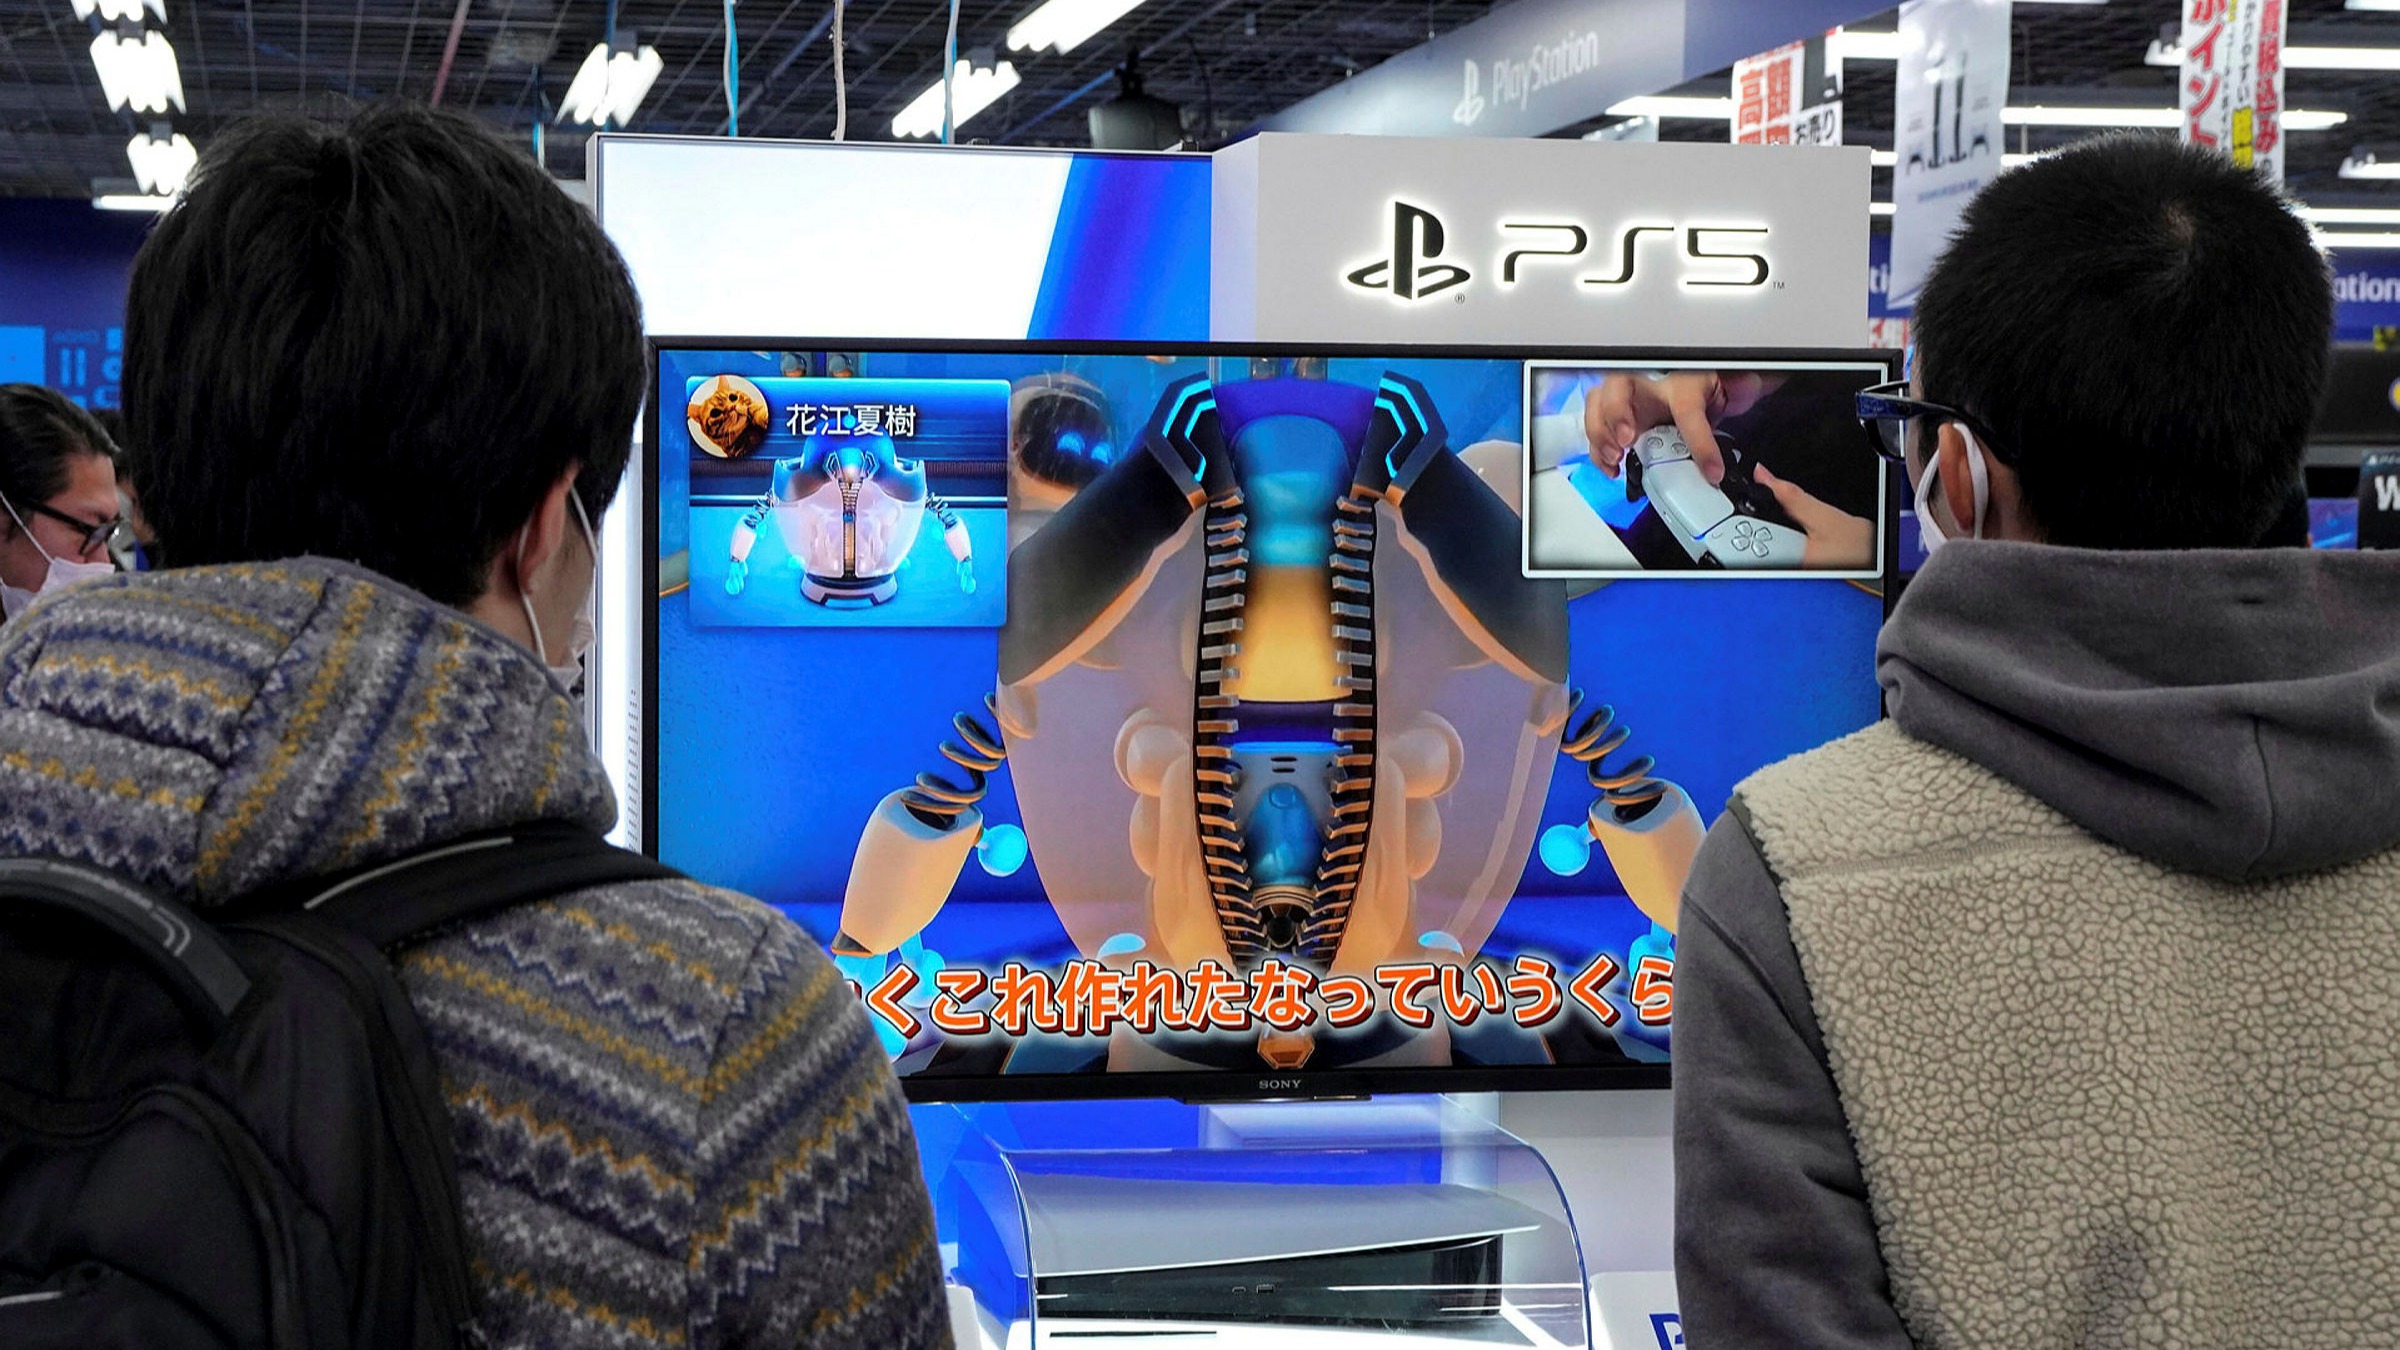 Sony's flashy PS5 launch to affirm Japan's gadget prowess | Financial